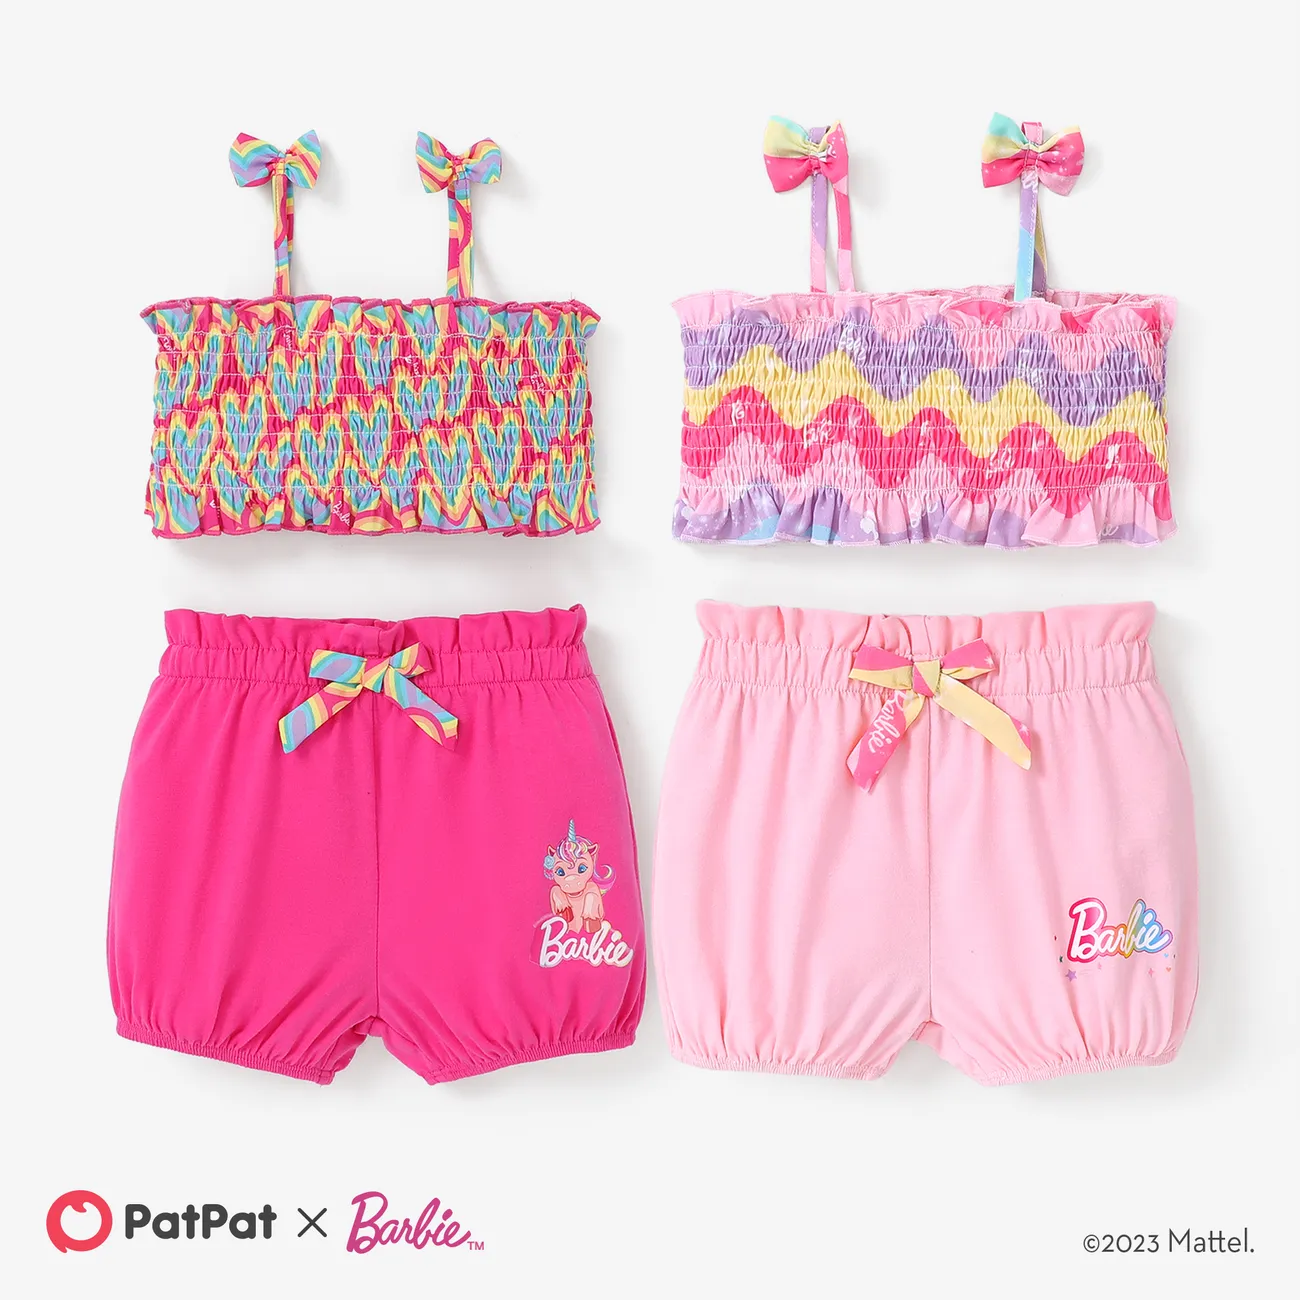 Barbie 2pcs Baby/Toddler Girls Top with All-over Heart/Colorful printed Bow Camisole and Soft Cotton Lantern Shorts Set
 Roseo big image 1